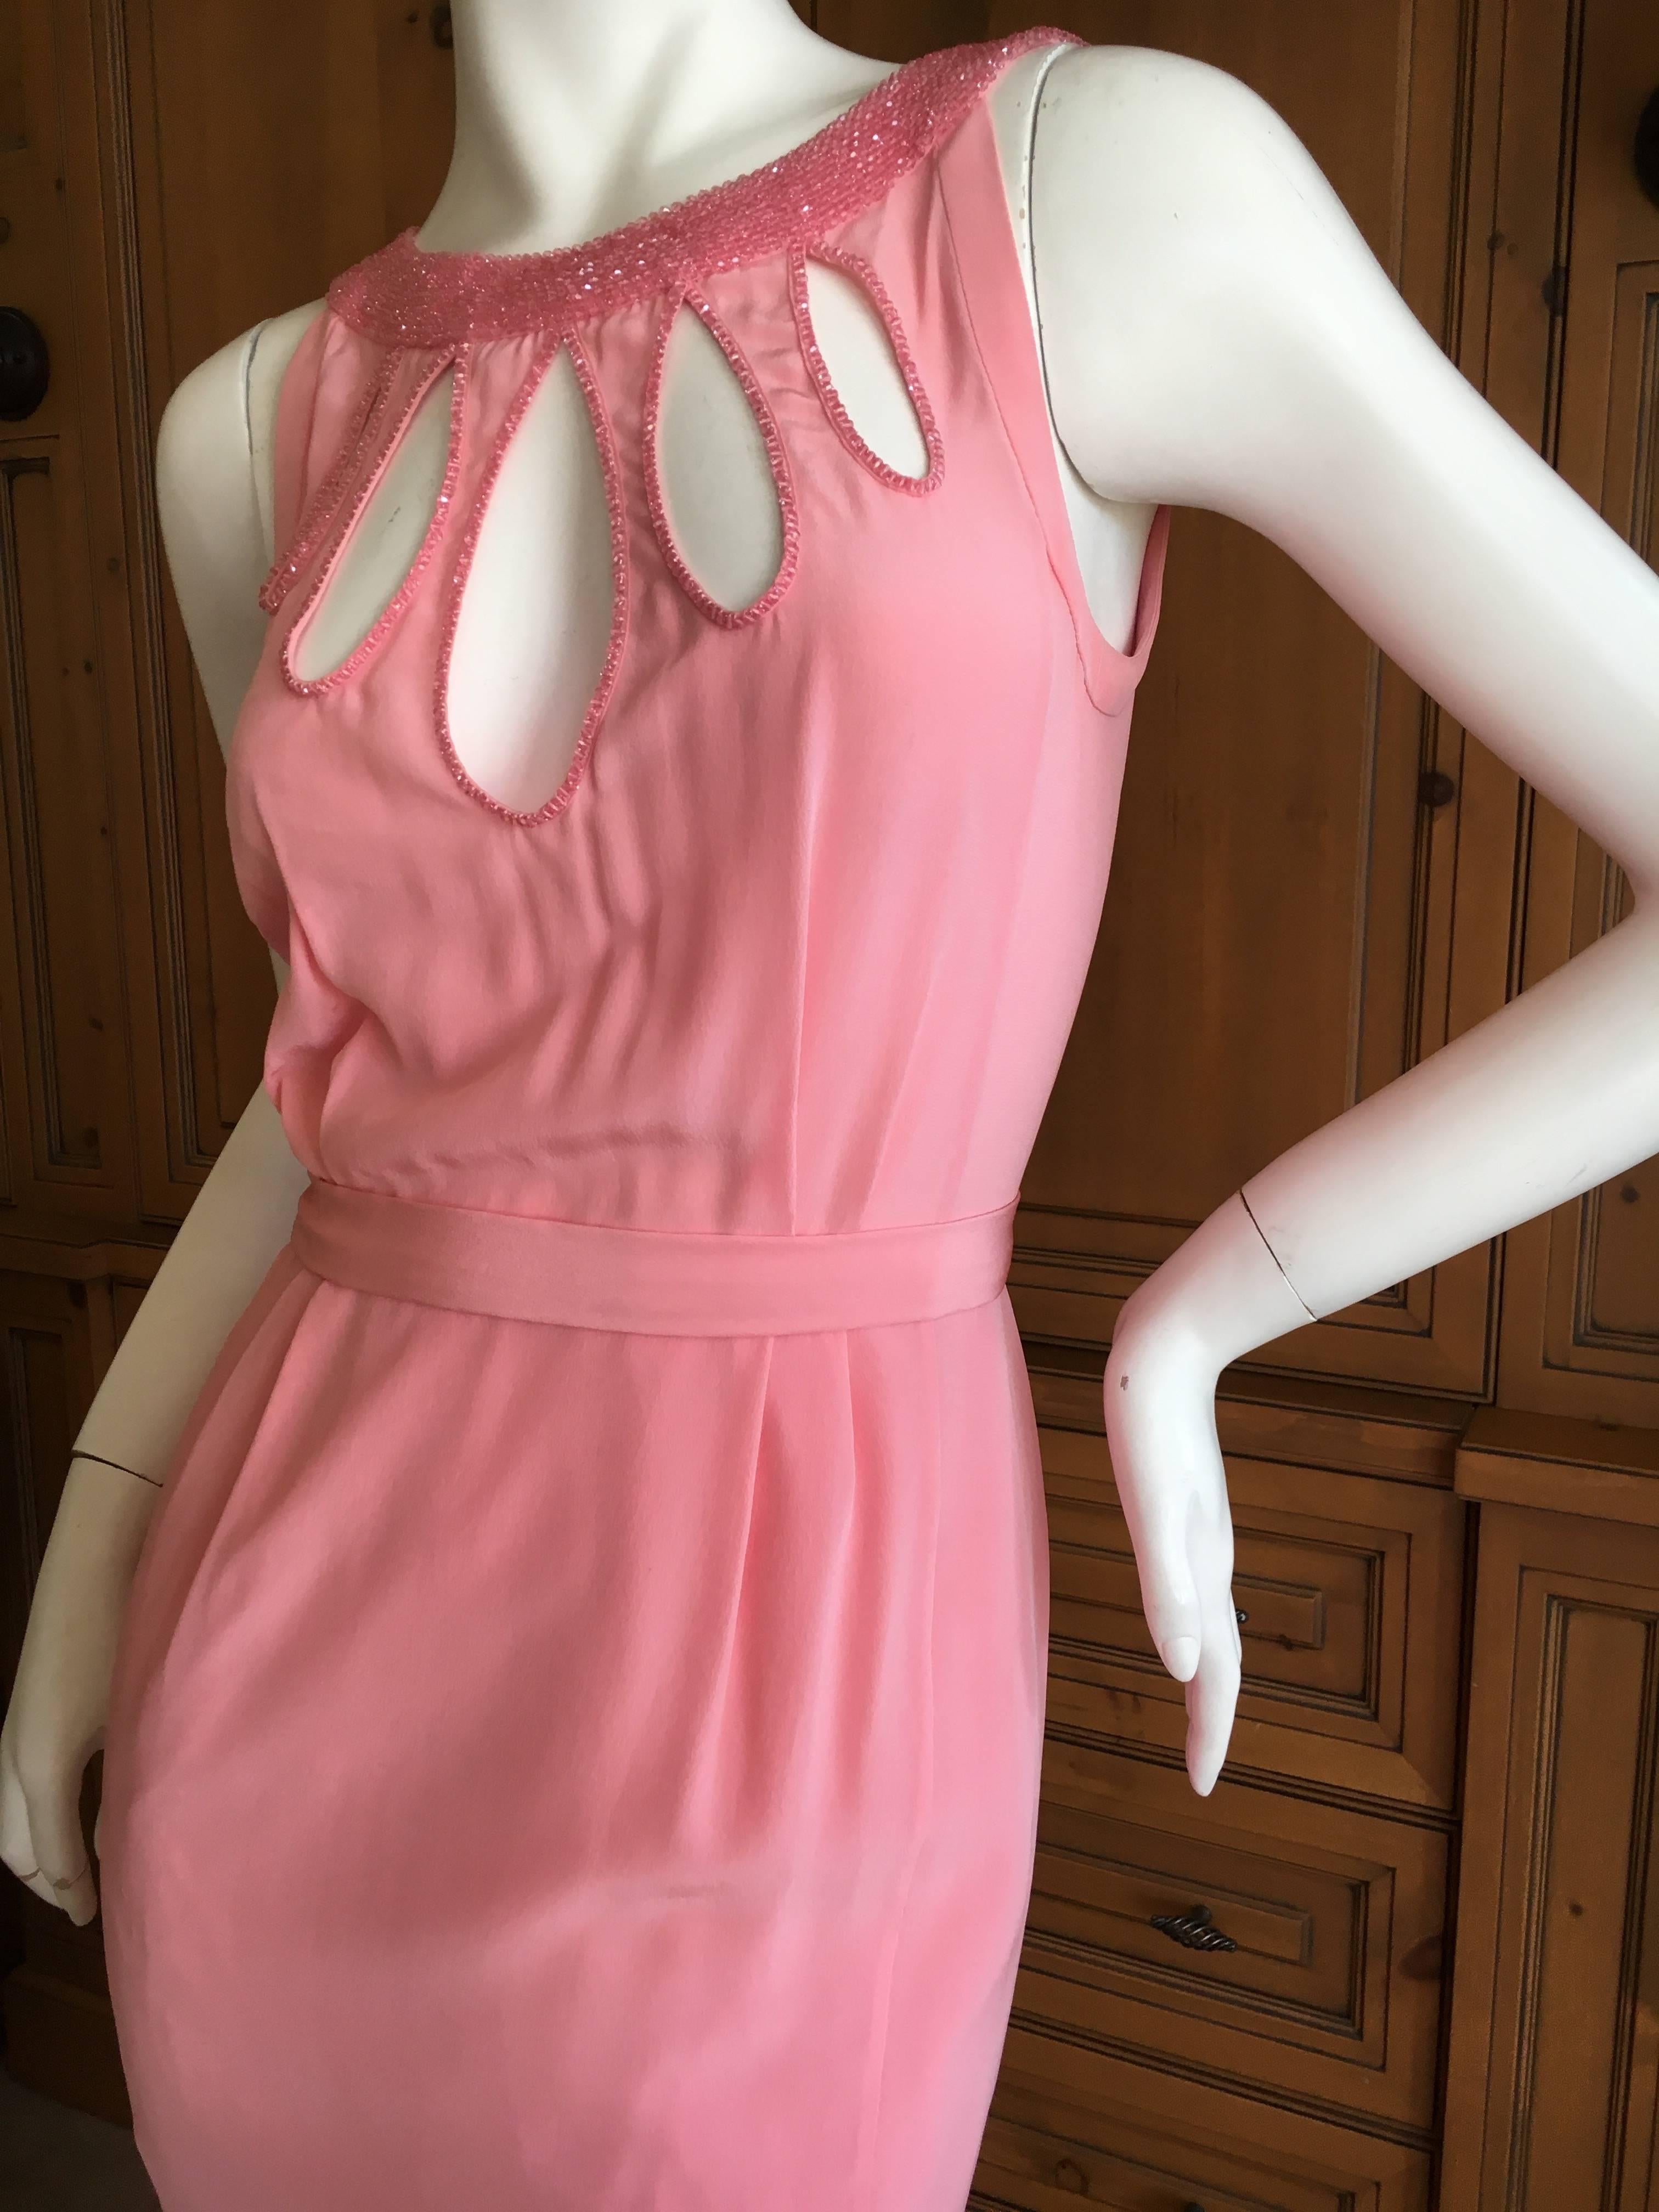 Moschino Pink Beaded Evening Dress with Keyhole Accents.
Size 6 
French 36
IT 40
Bust 38"
Length 65"